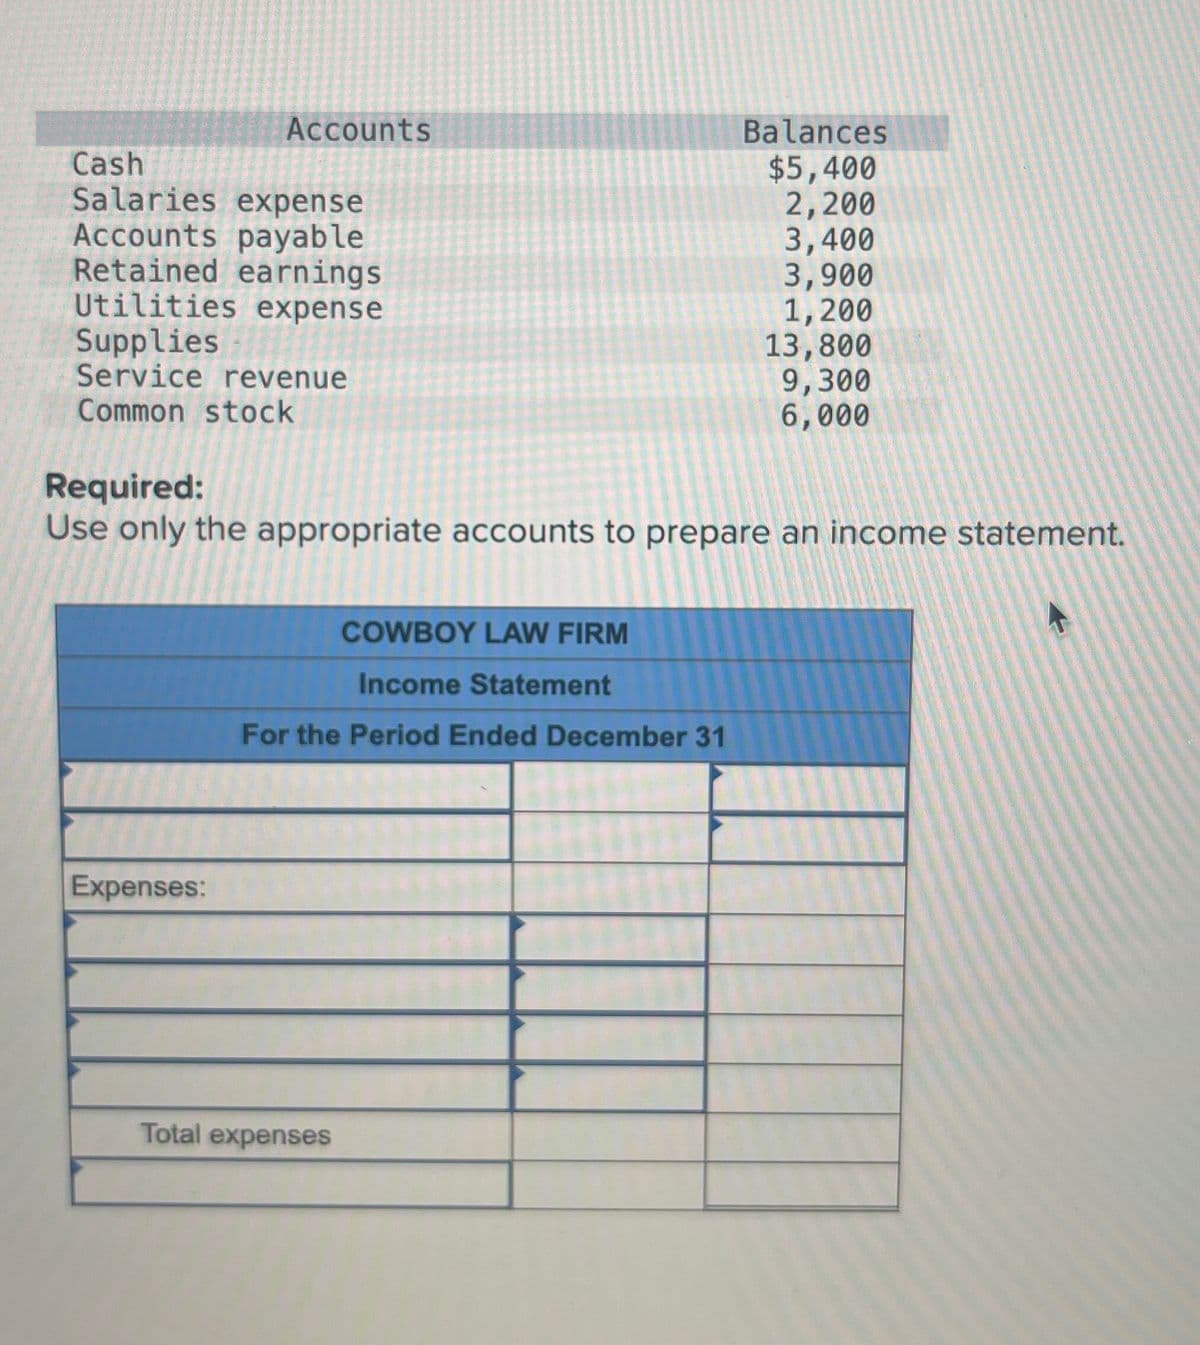 Accounts
Balances
Cash
$5,400
Salaries expense
2,200
Accounts payable
3,400
Retained earnings
3,900
Utilities expense
1,200
Supplies
13,800
Service revenue
9,300
Common stock
6,000
Required:
Use only the appropriate accounts to prepare an income statement.
Expenses:
COWBOY LAW FIRM
Income Statement
For the Period Ended December 31
Total expenses